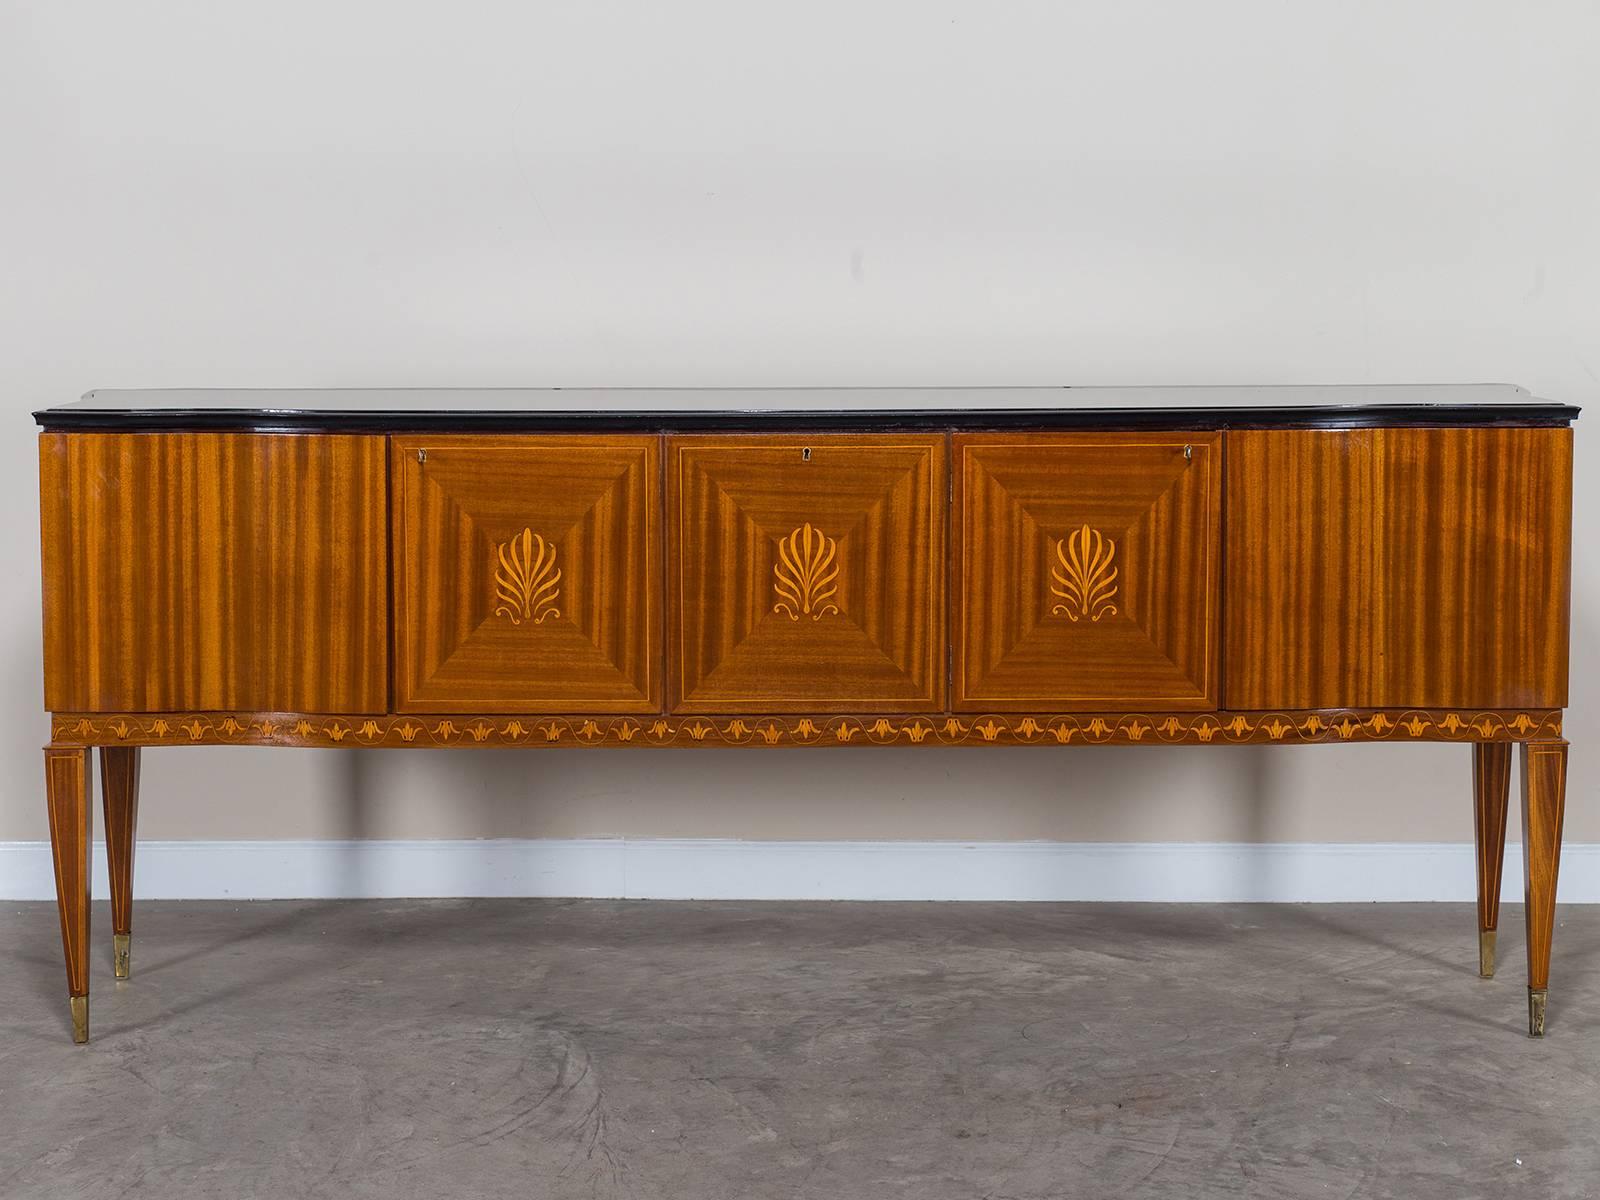 Receive our new selections direct from 1stdibs by email each week. Please click Follow Dealer below and see them first!

The striking design of this sideboard is attributed to the famous Italian designer Paolo Buffa. Known for his exotic and